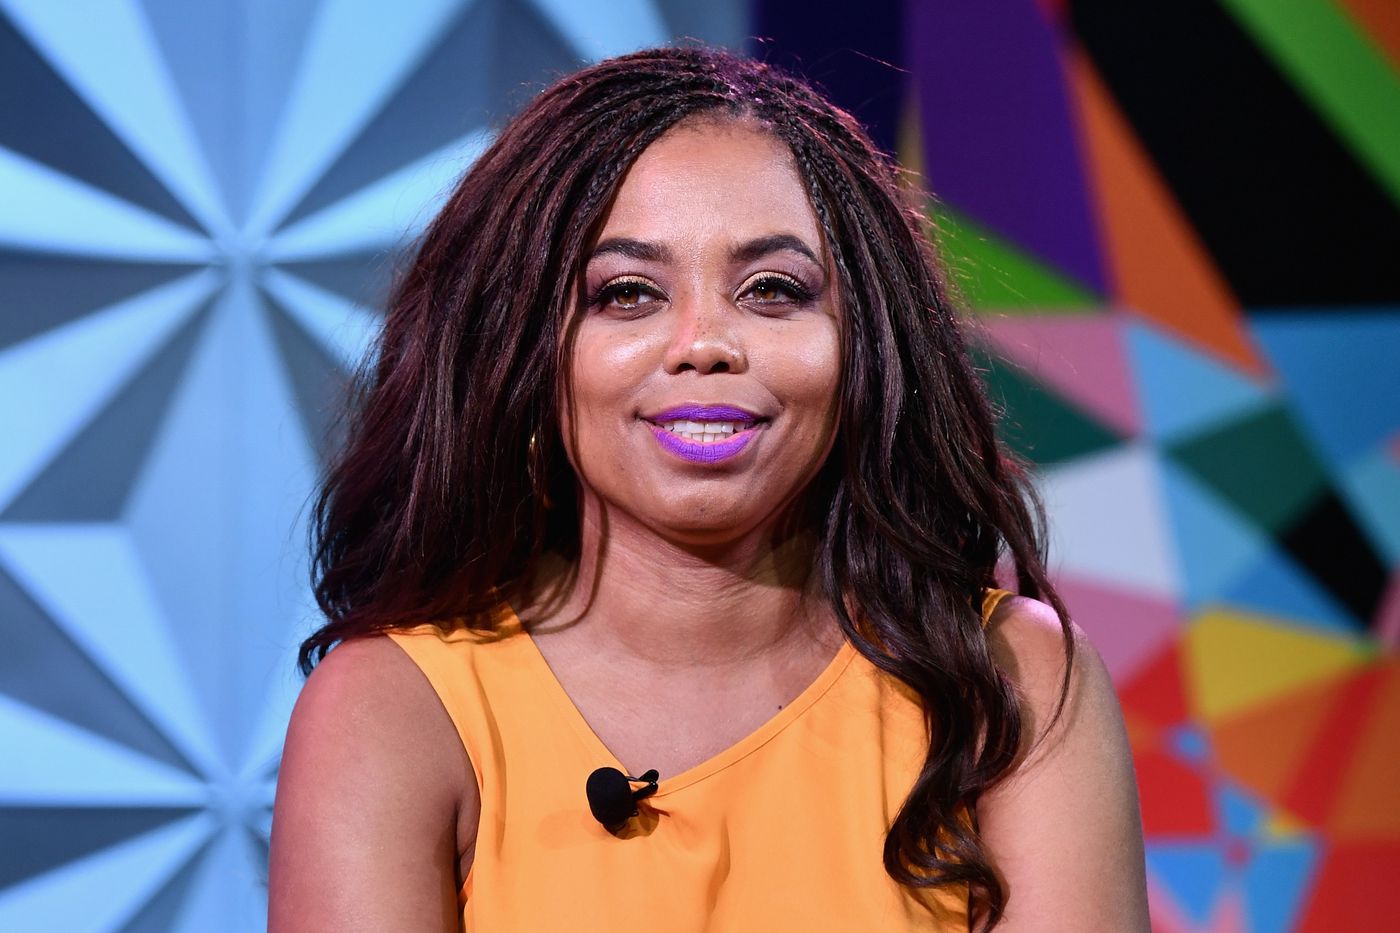 Atlantic writer and former ESPN talker Jemele Hill, says that each and ever...